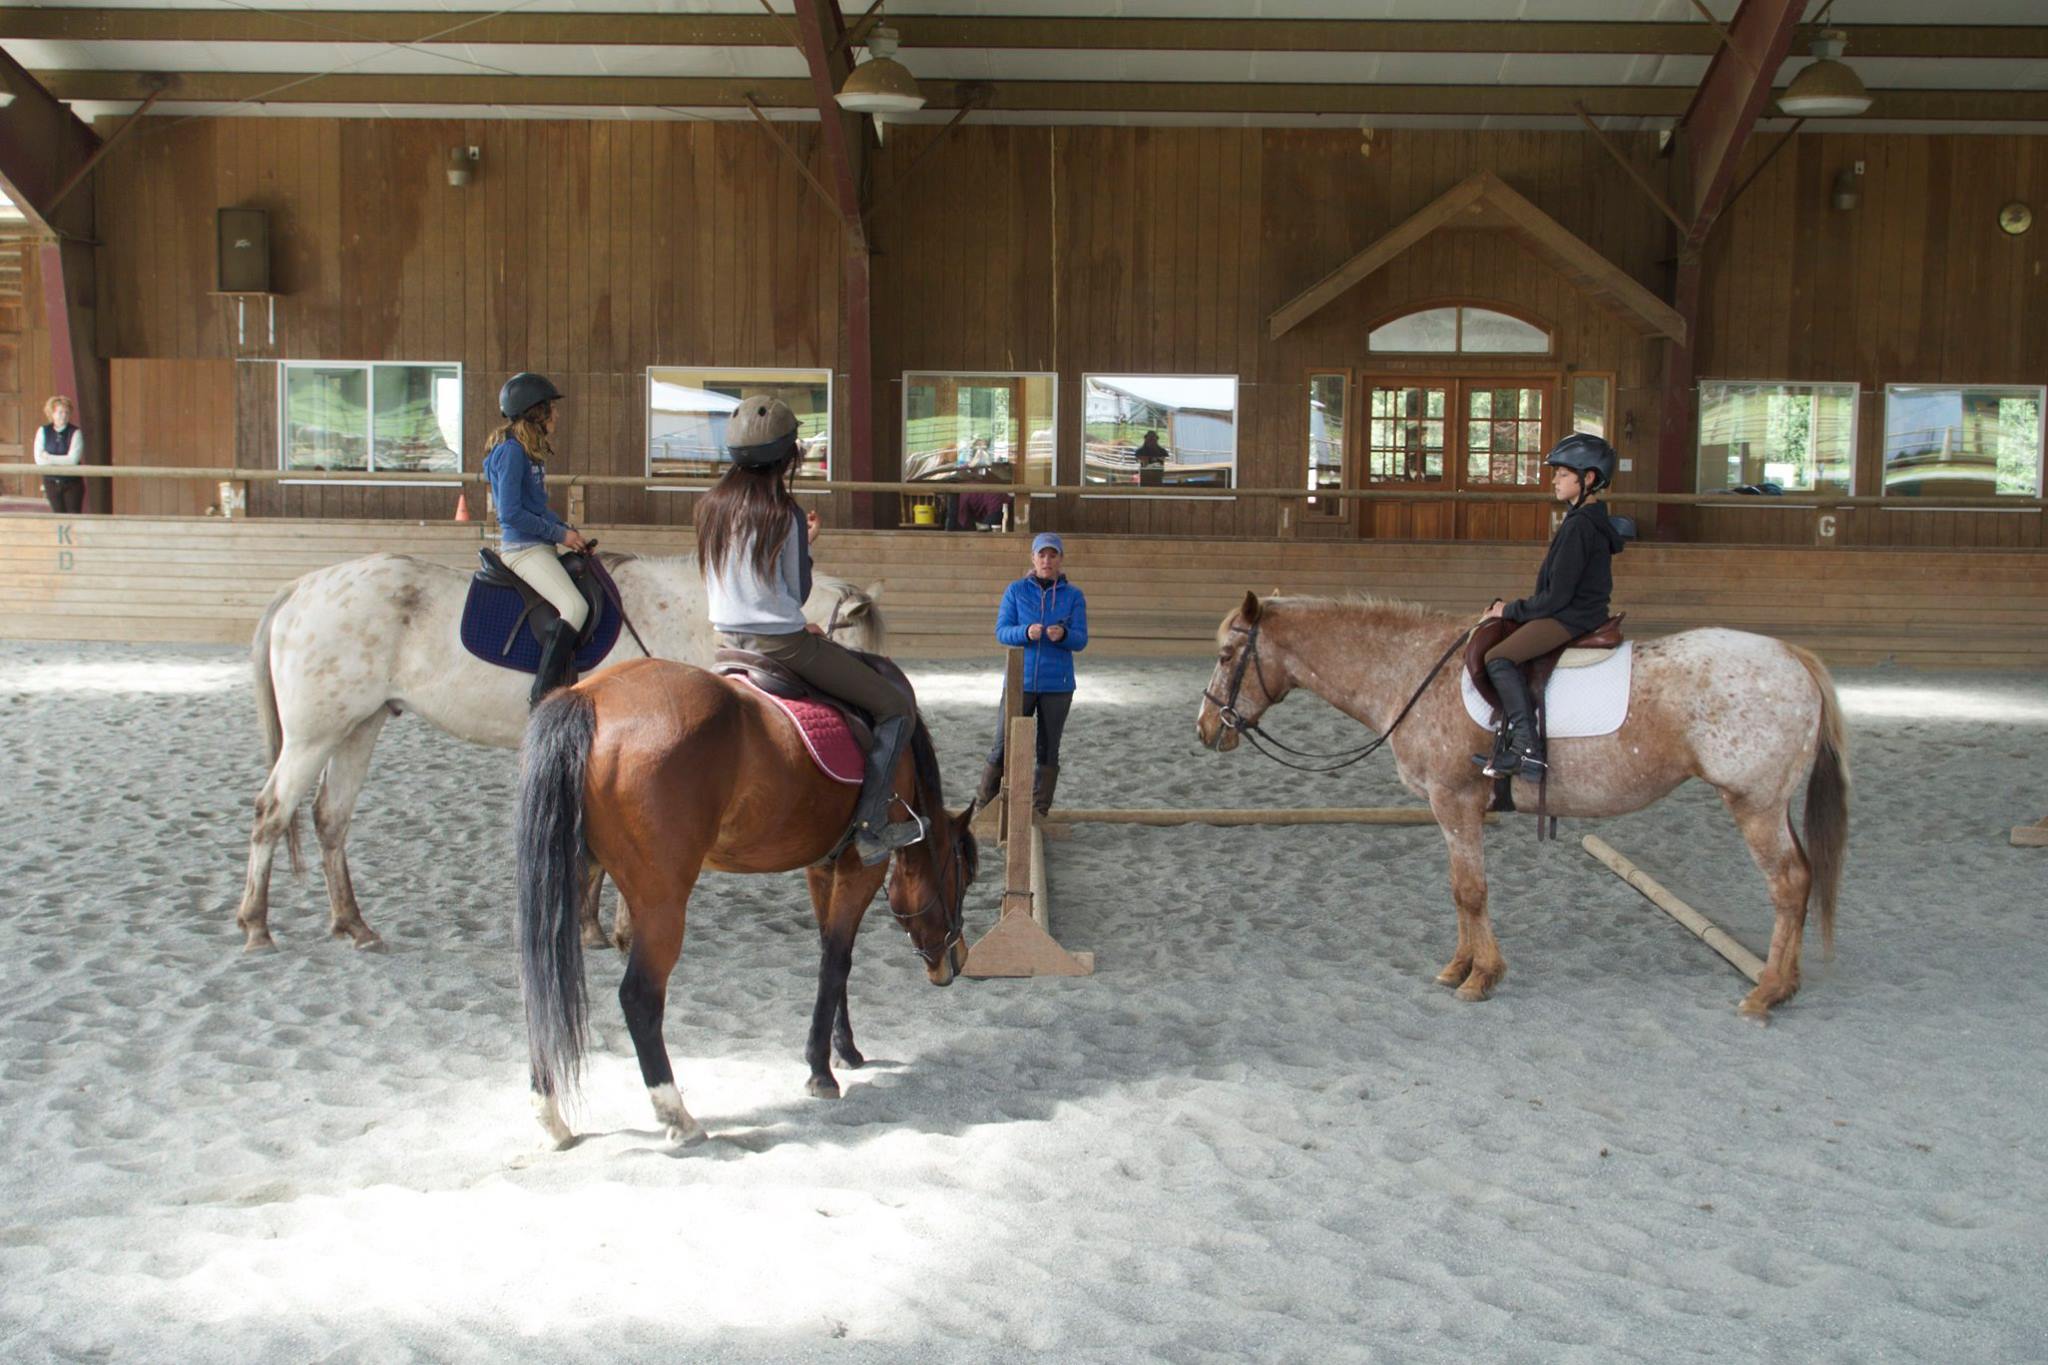 Freedom Farm is a natural horsemanship-based training and boarding facility, offering youth horsemanship programs as well as adult classes and lessons.